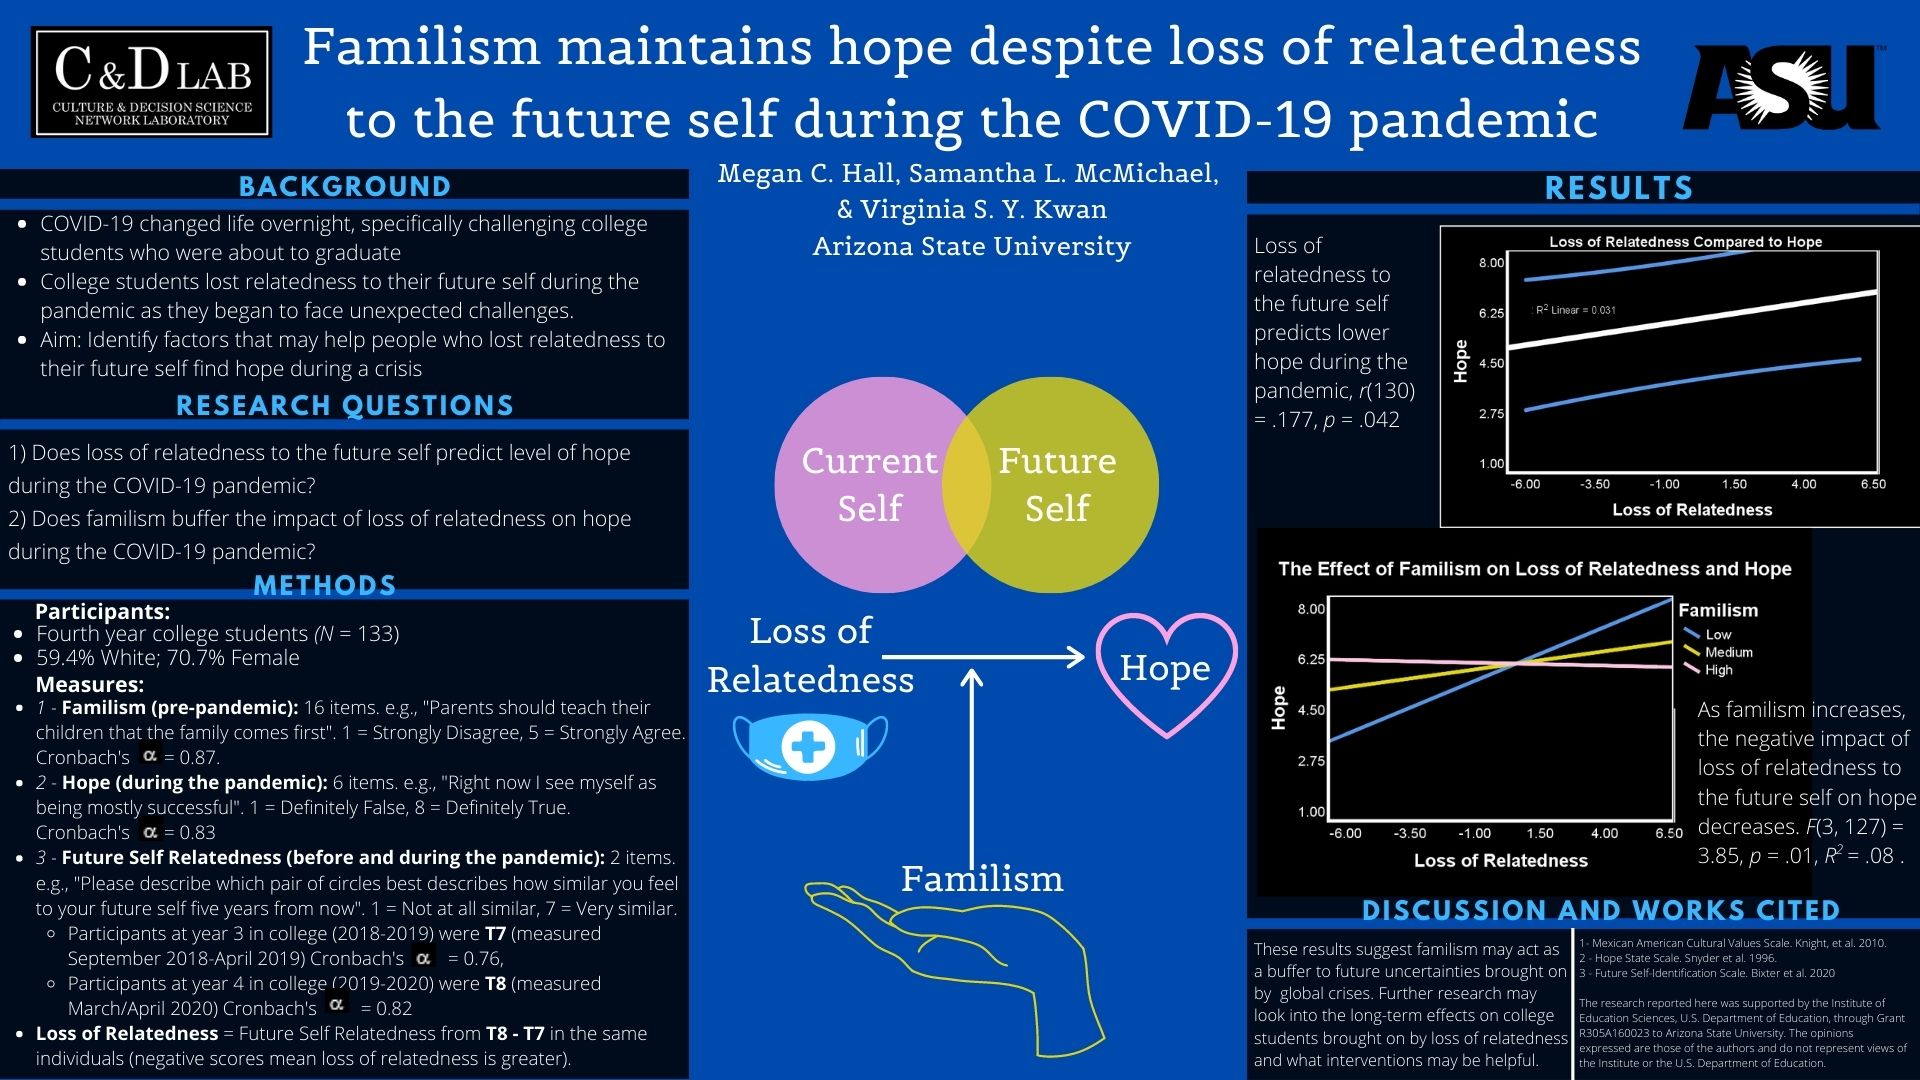 poster with a black background and blue elements displaying overlapping circles between the current self and future self and a diagram with a line with an arrow pointing from loss of relatedness to hope, with familism pointing to the middle of the line